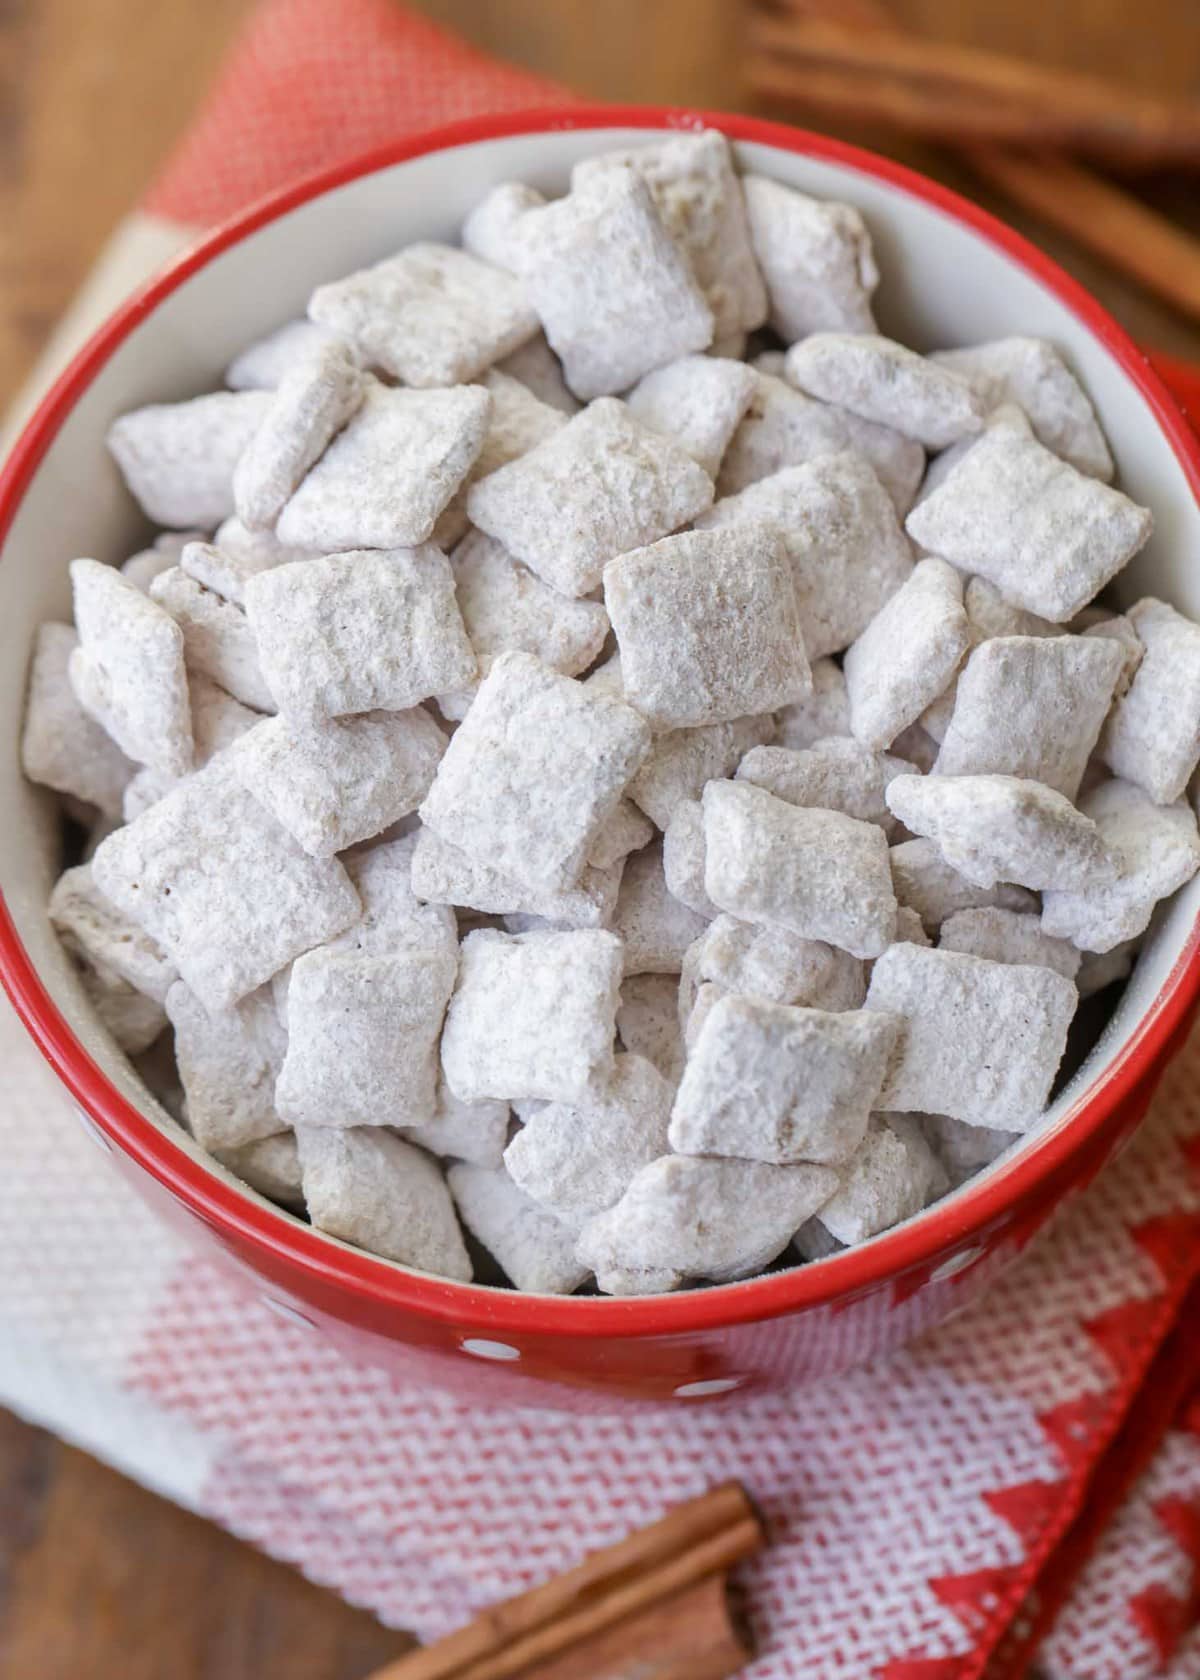 Snickerdoodle puppy chow in a red bowl